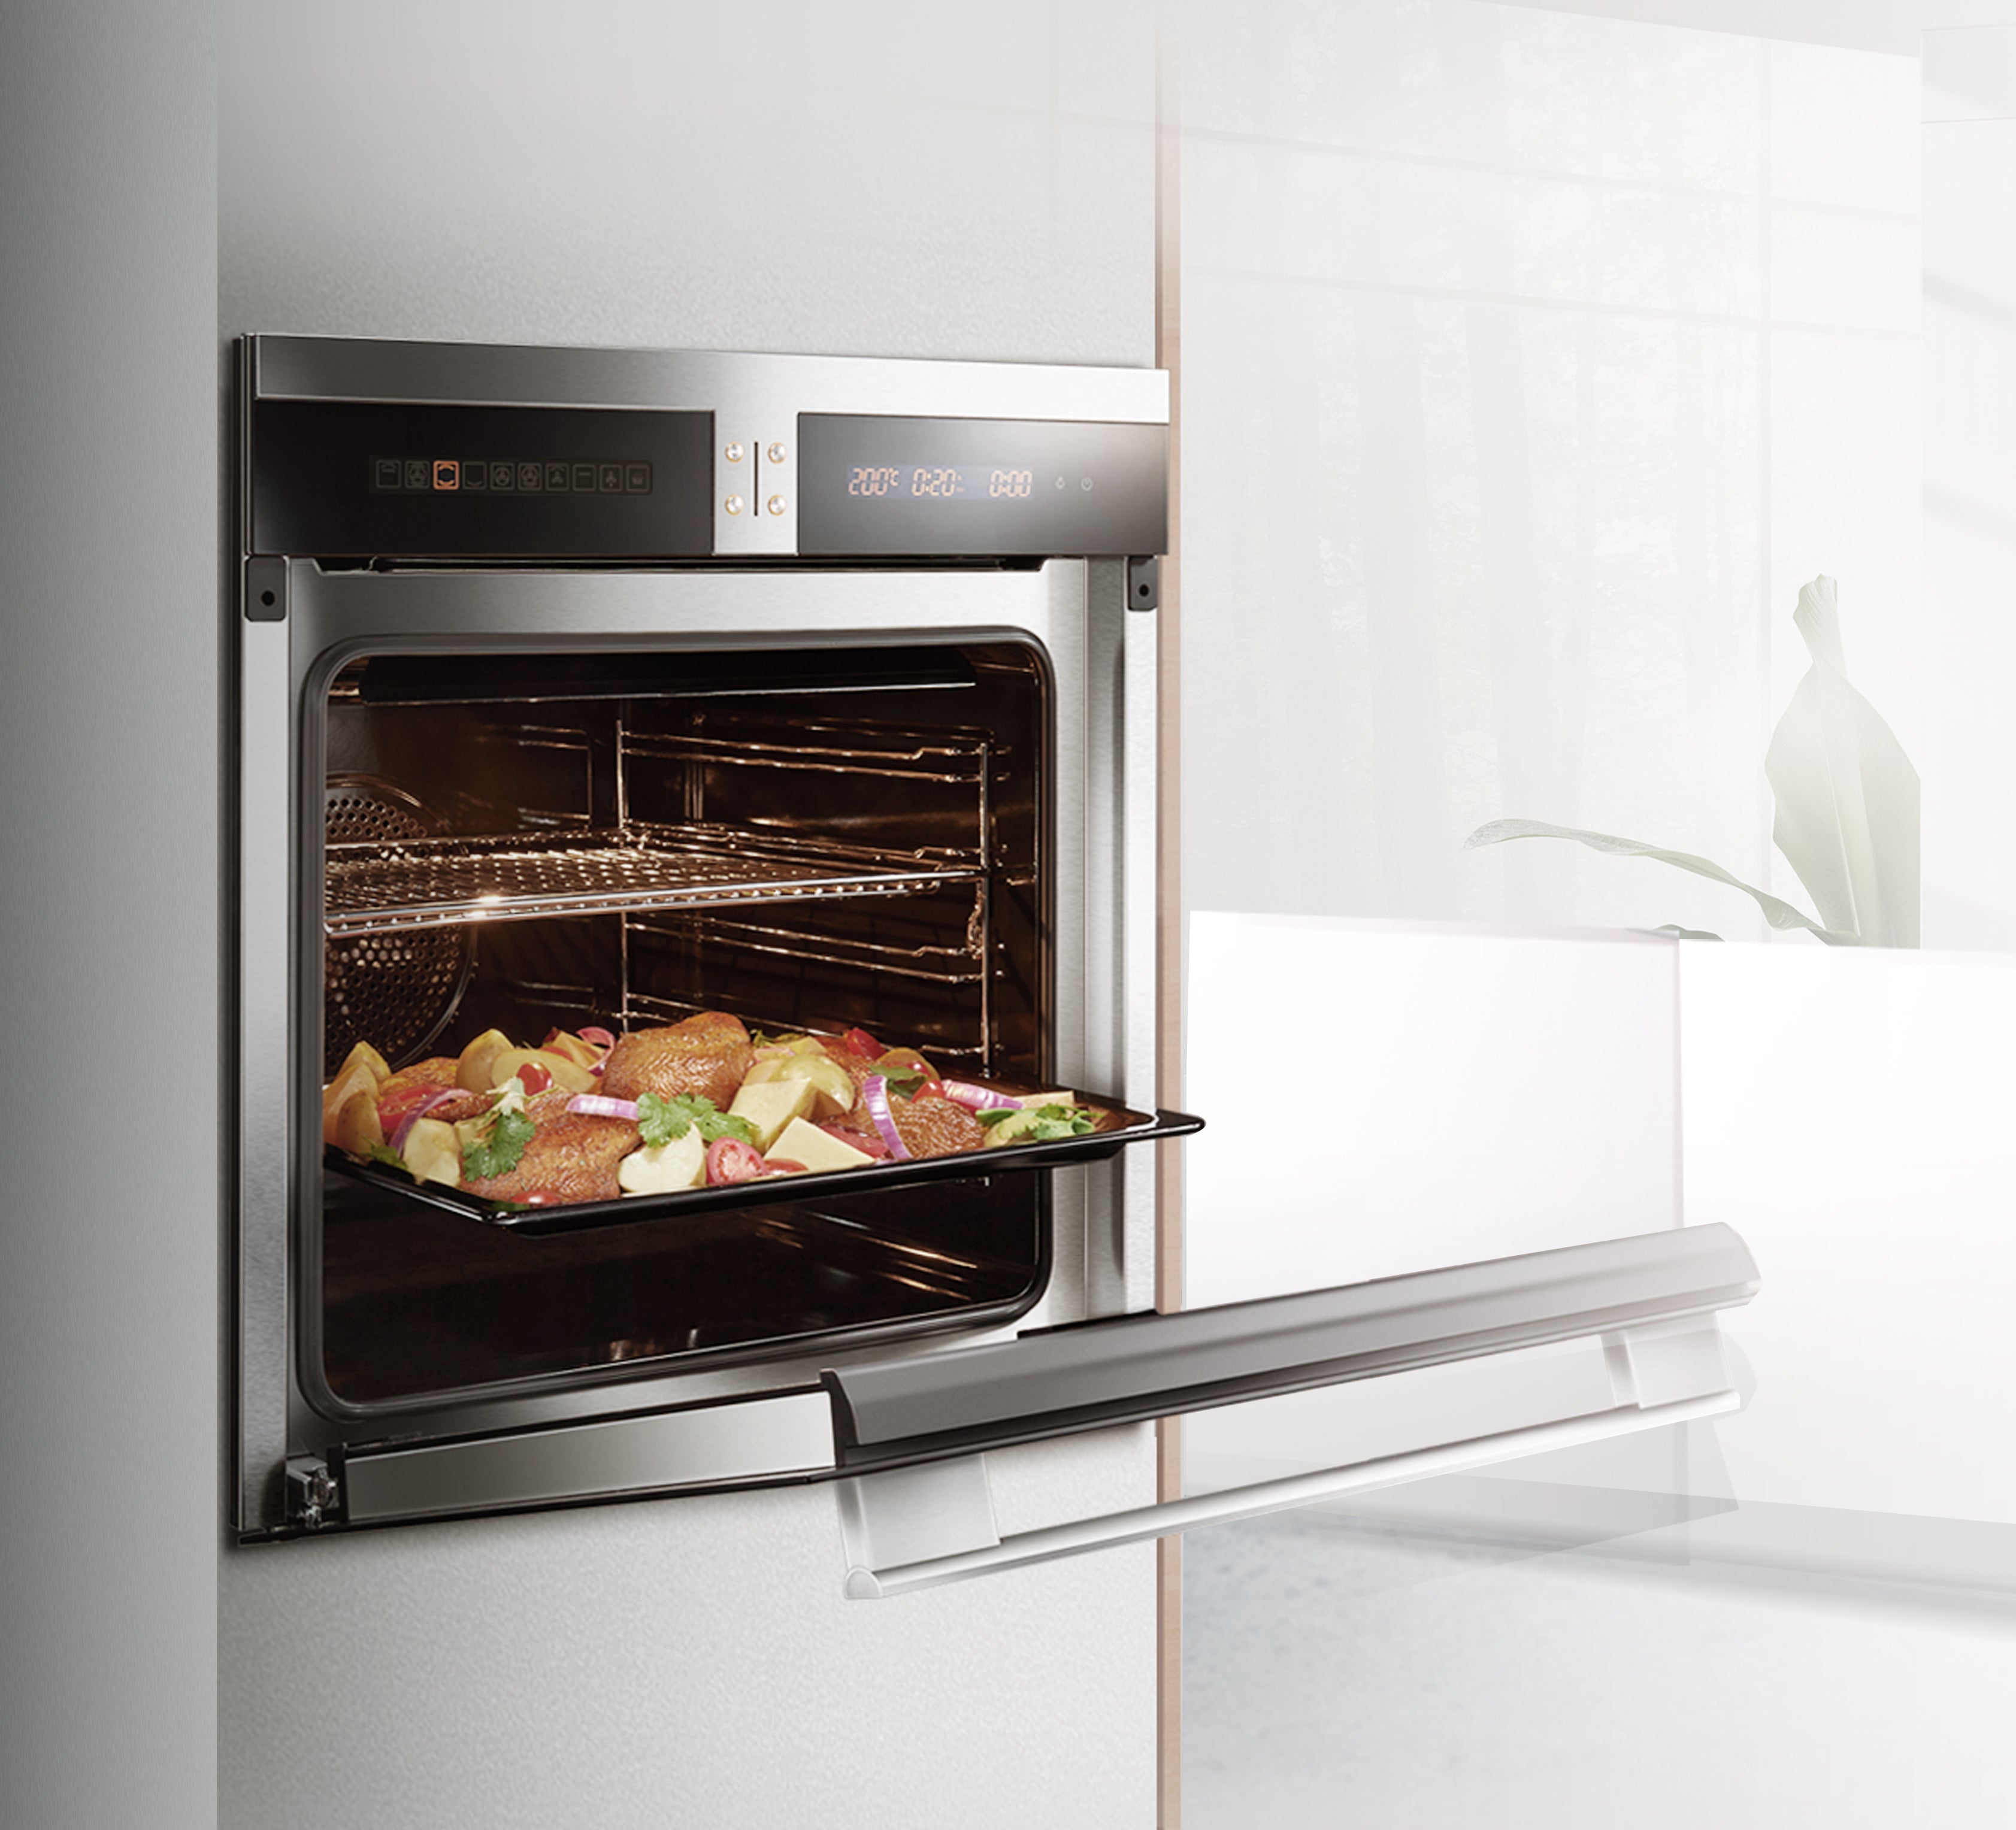 Fotile 24 in. Convection Built-In Electric Wall Oven in Stainless Steel (KSS7002A)